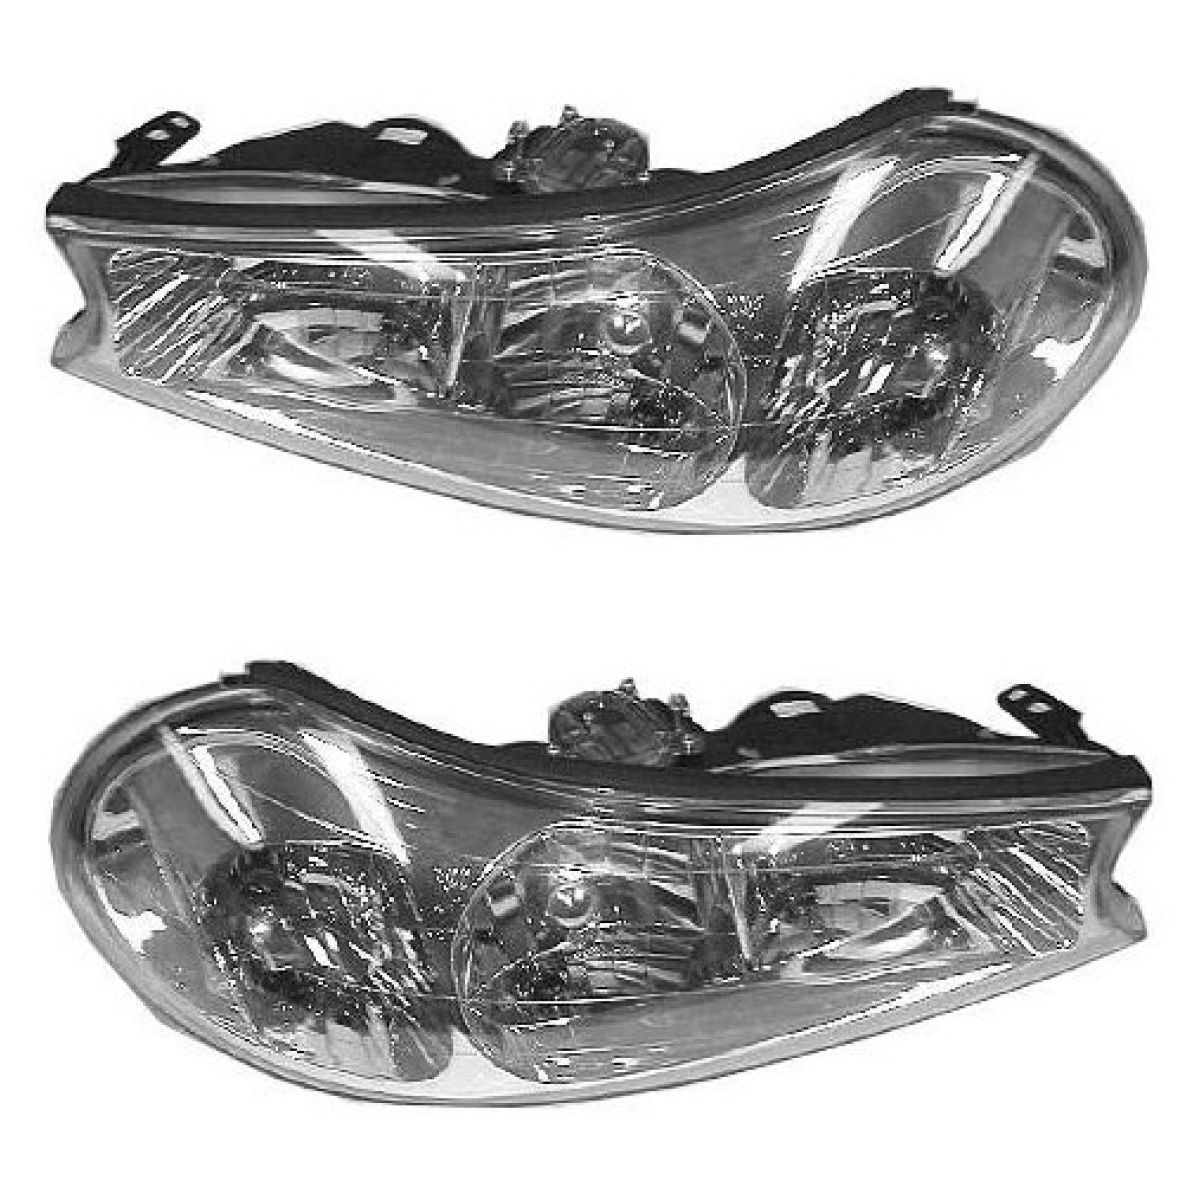 Ford contour headlight bulb replacement #8